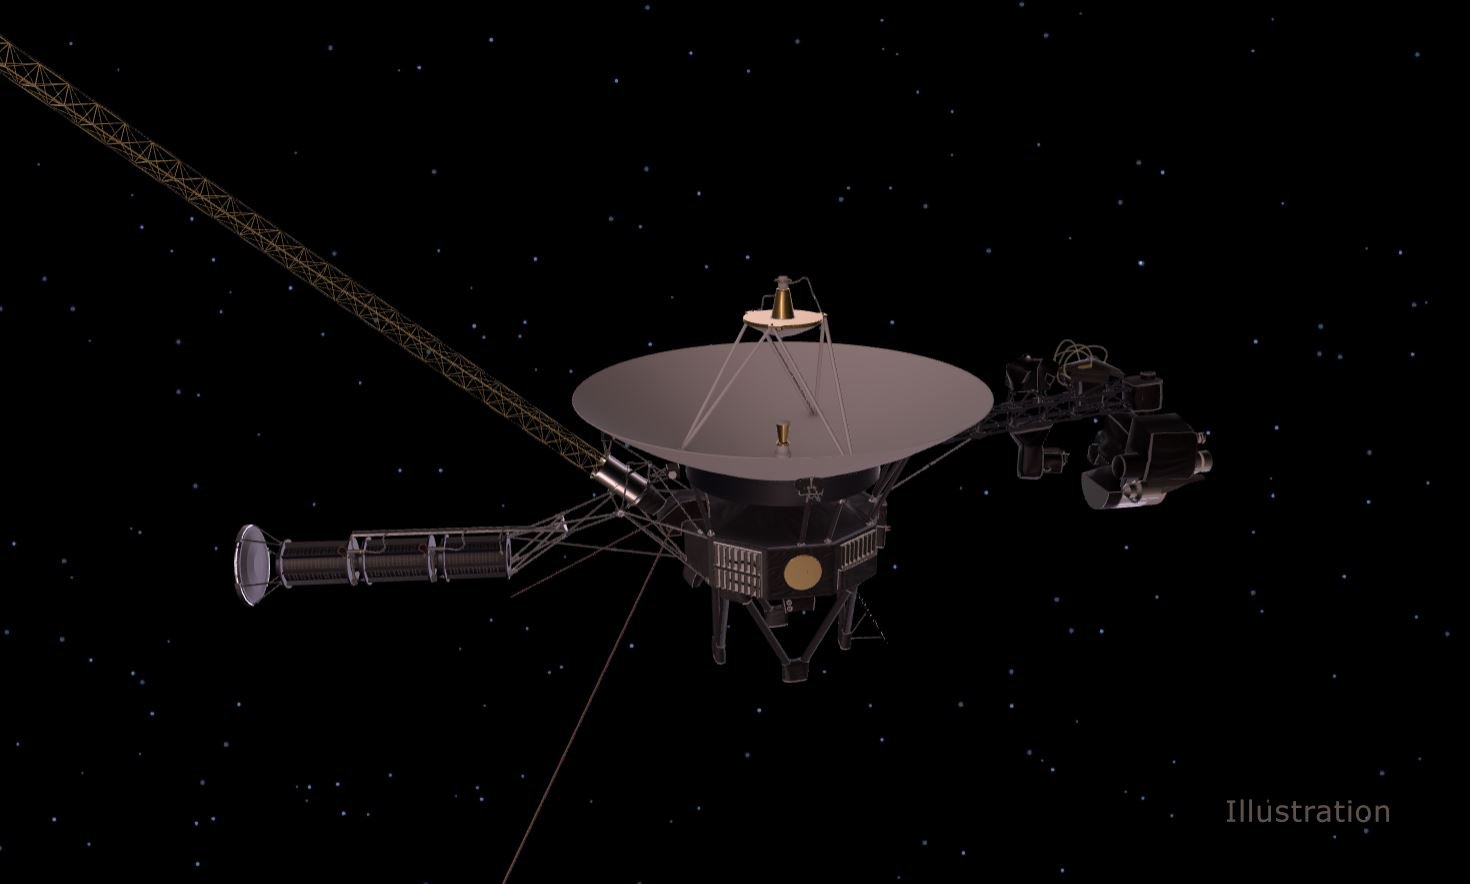 NASA fixed the glitch that caused Voyager 1 to send back jumbled data